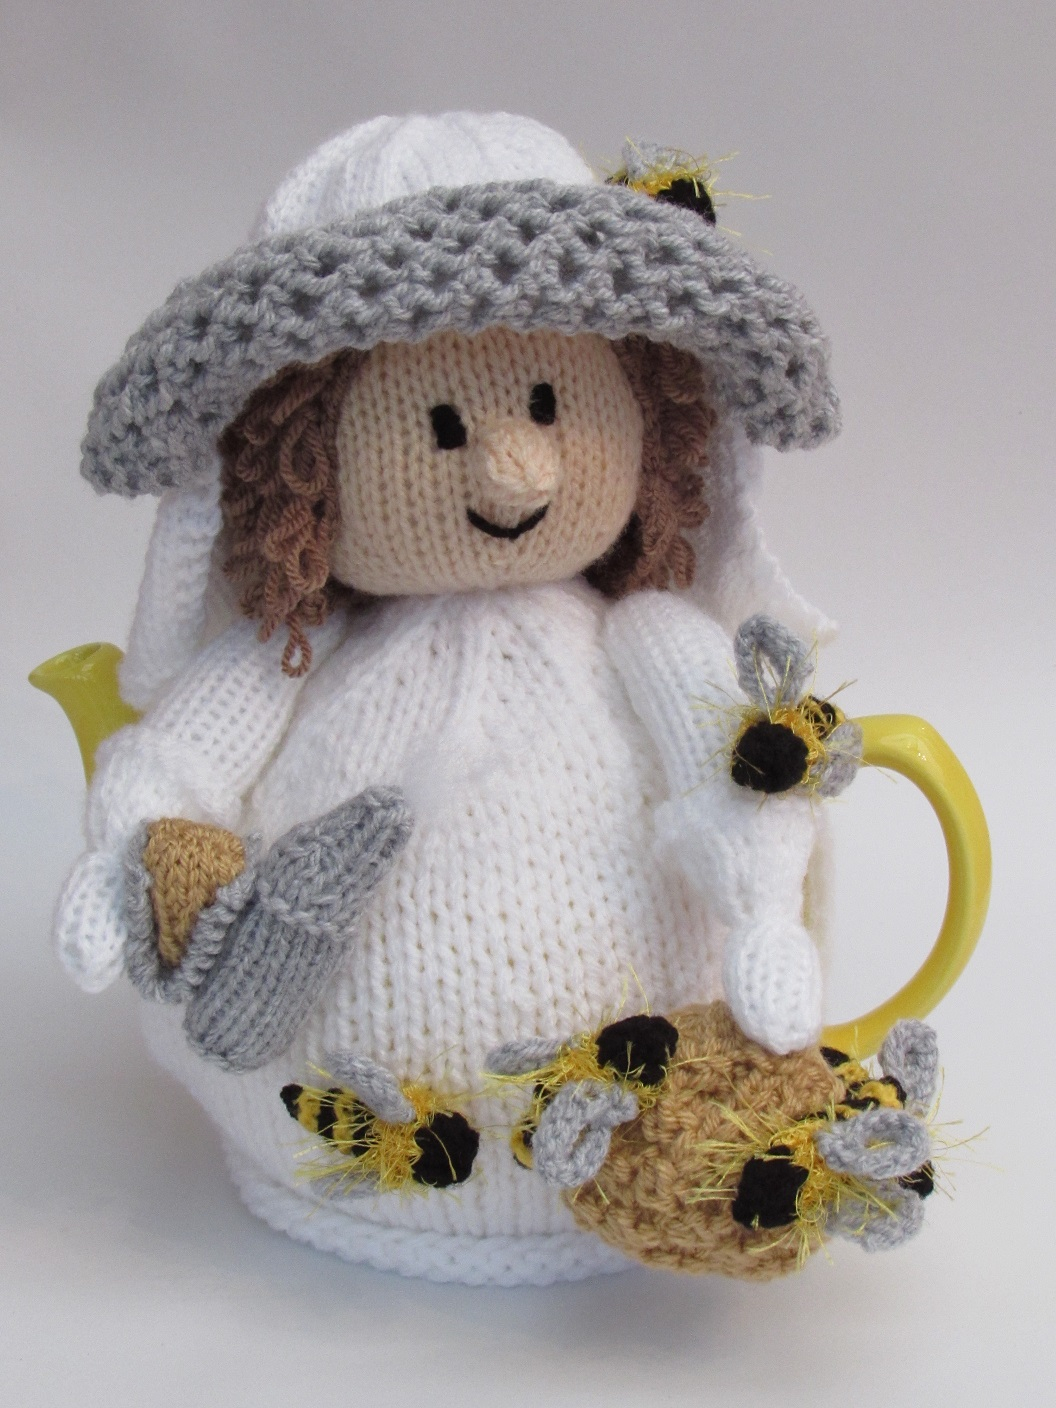 Tea Cozy Patterns To Knit Tea Cosy Knitting Patterns From Tea Cosy Folk Learn How To Knit Our